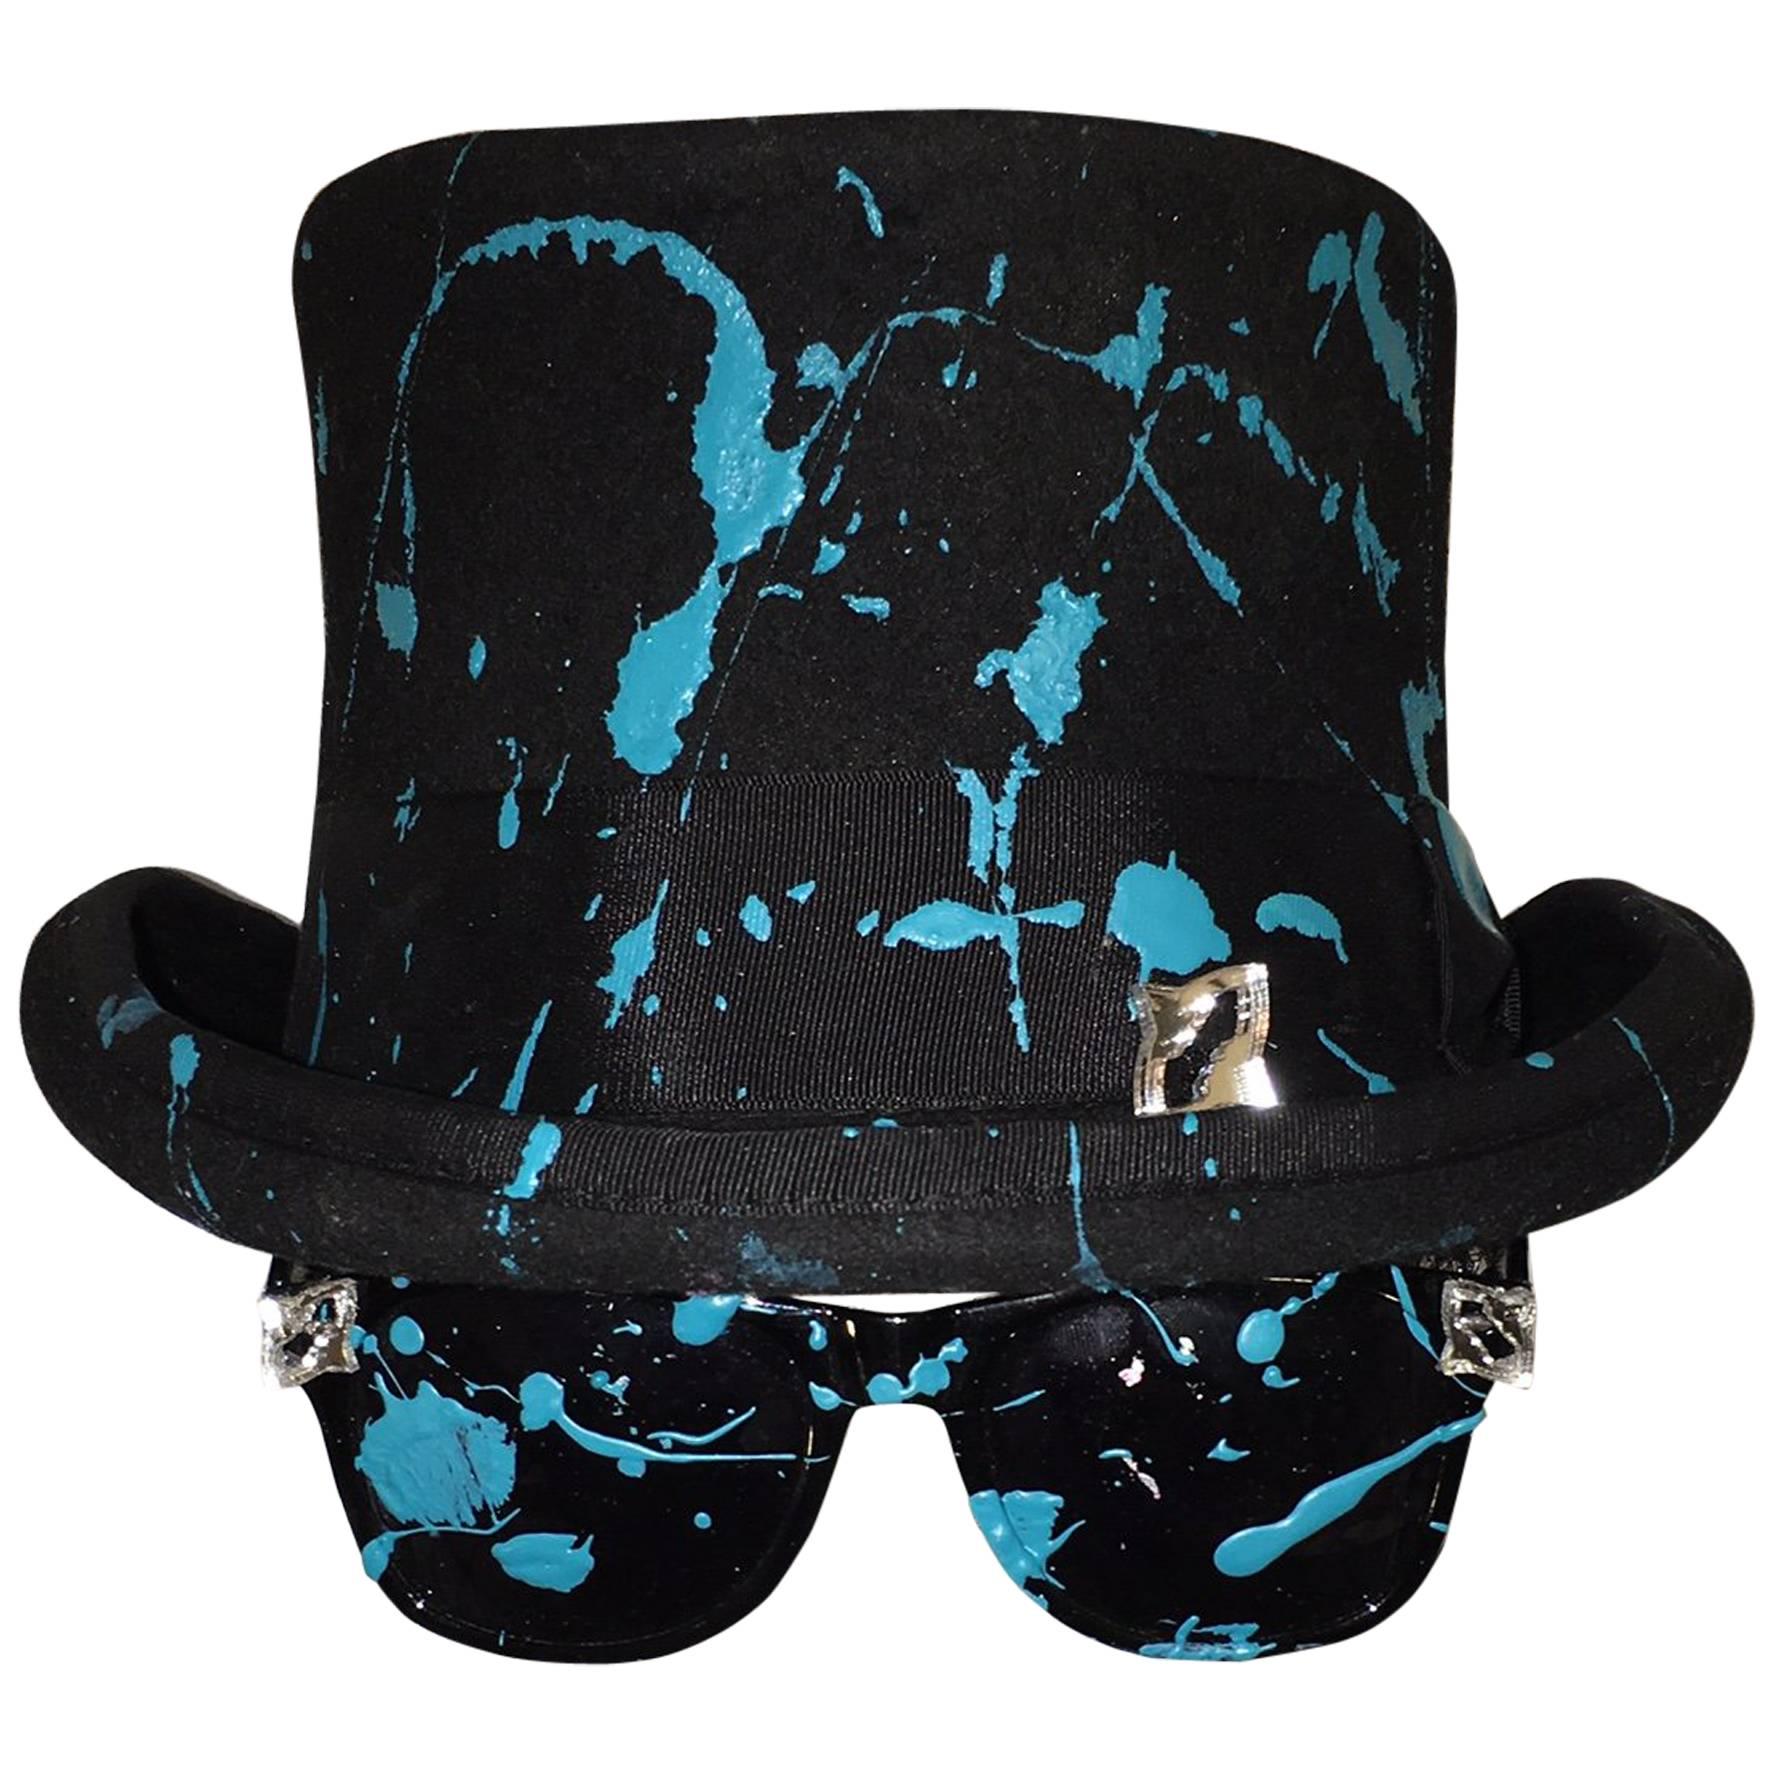 STACY ENGMAN ART ROYALTY - Classic Signature Sunglasses-Tiara - w Splat Top Hat For Sale